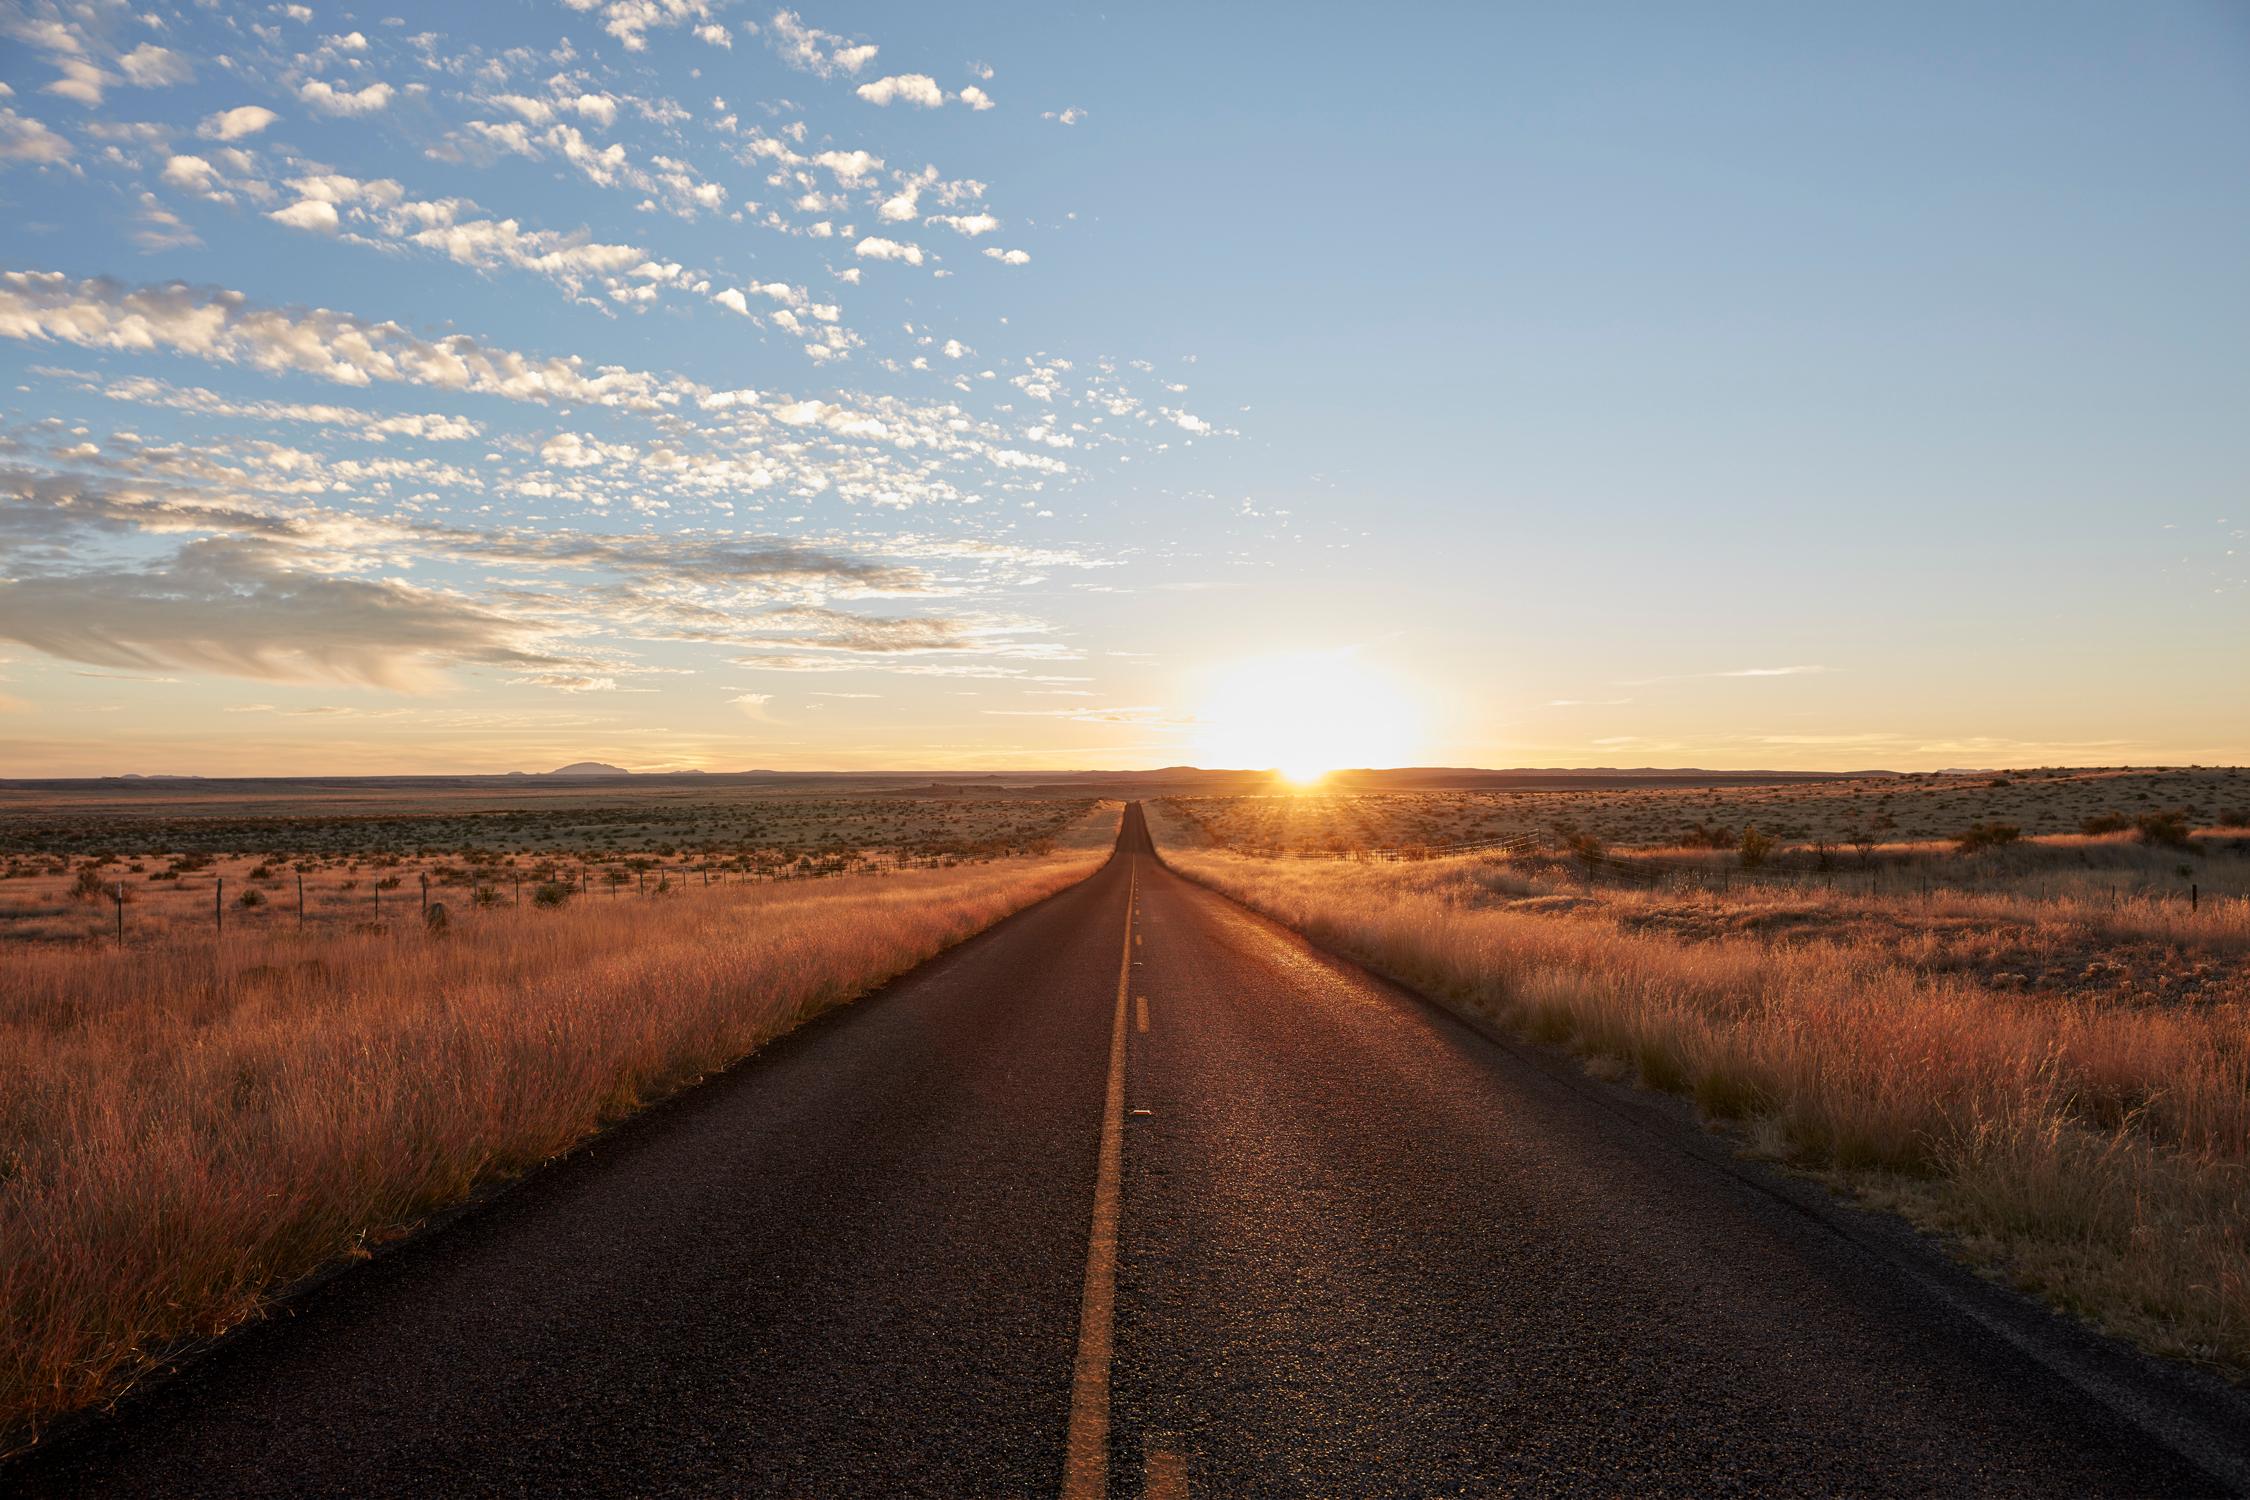 Marfa { The Road } - large scale photograph of endless road and horizon sunset